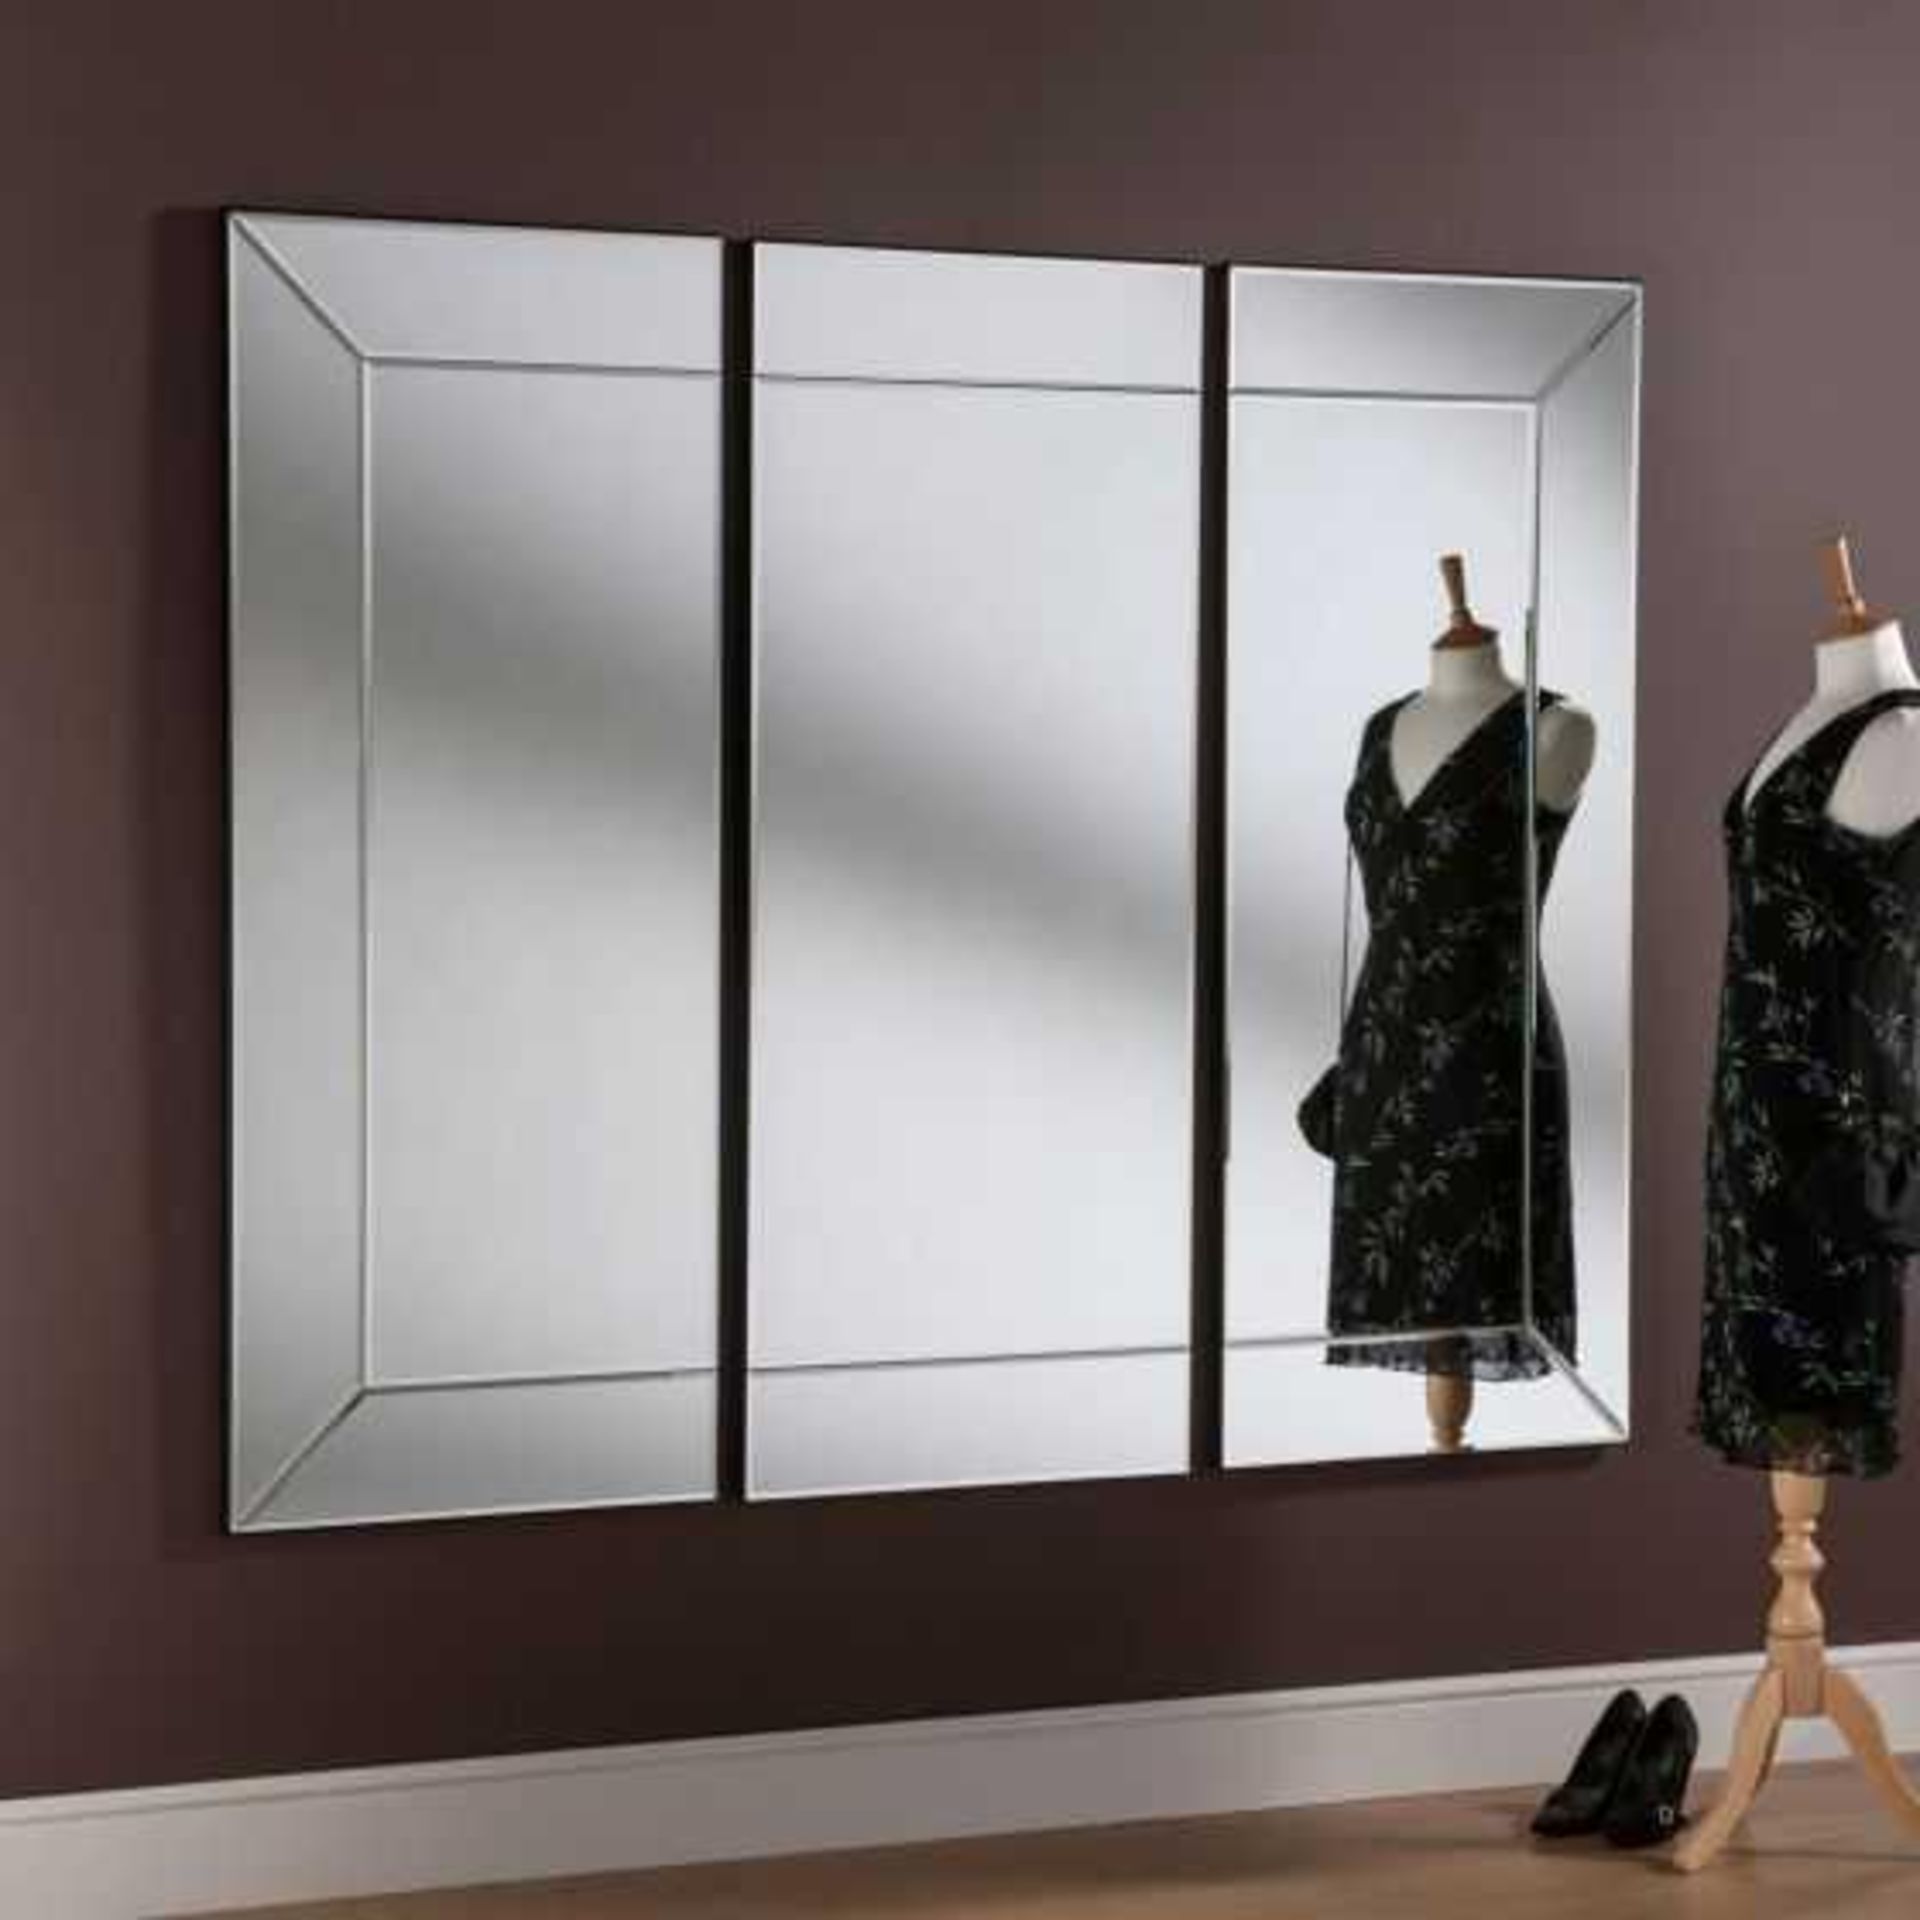 Rrp £320 Boxed Quality Bevelled 3 Pcs Mirror